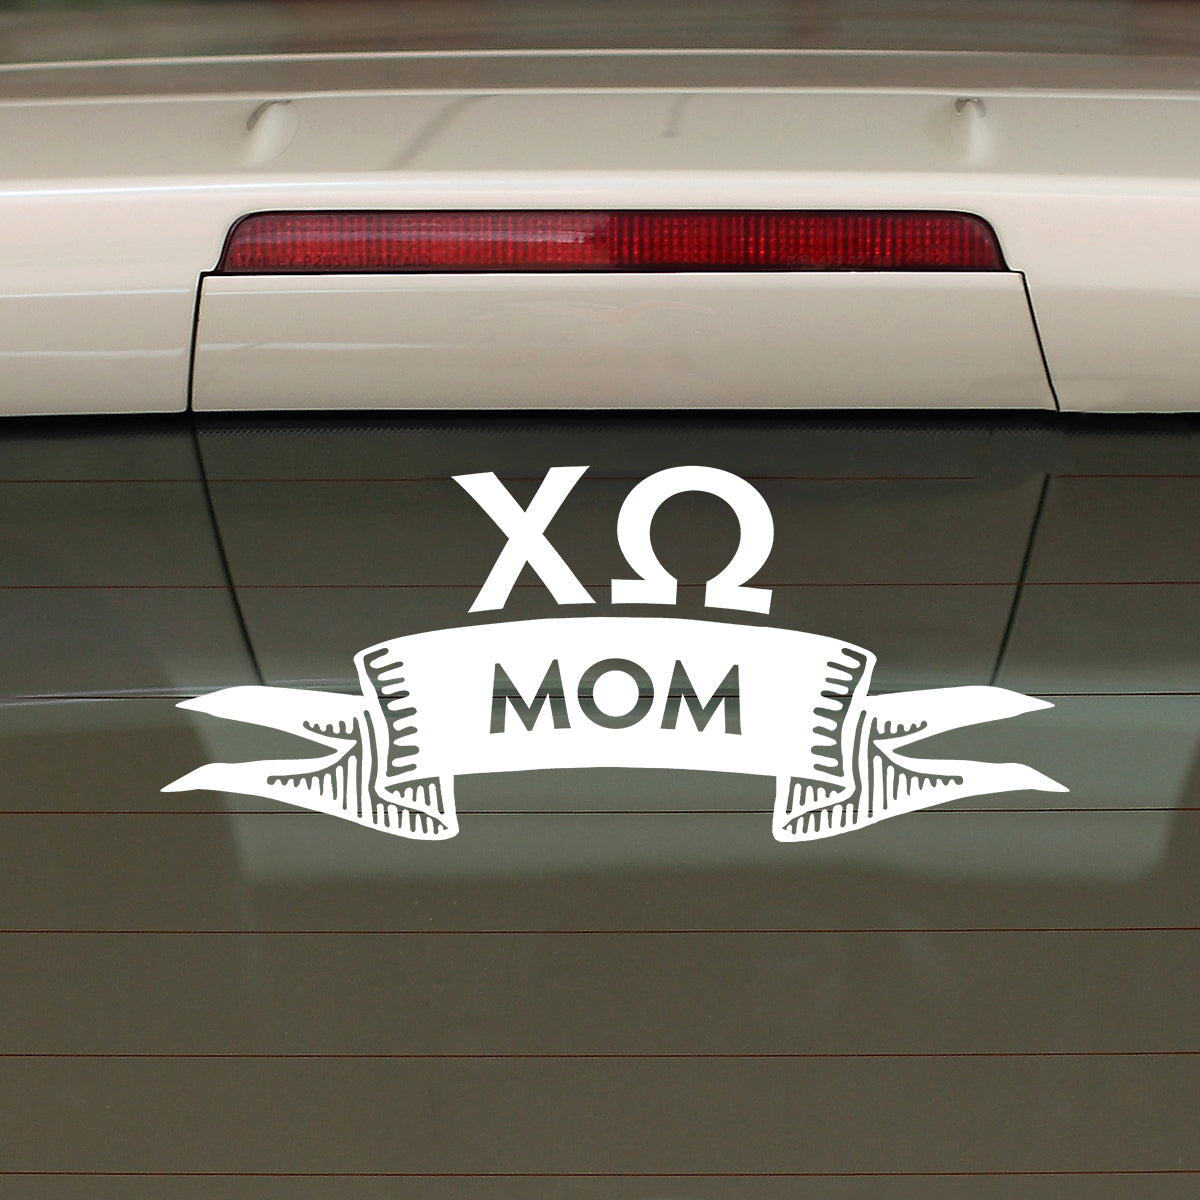 Chi Omega Mom Gift Pack | Brit and Bee